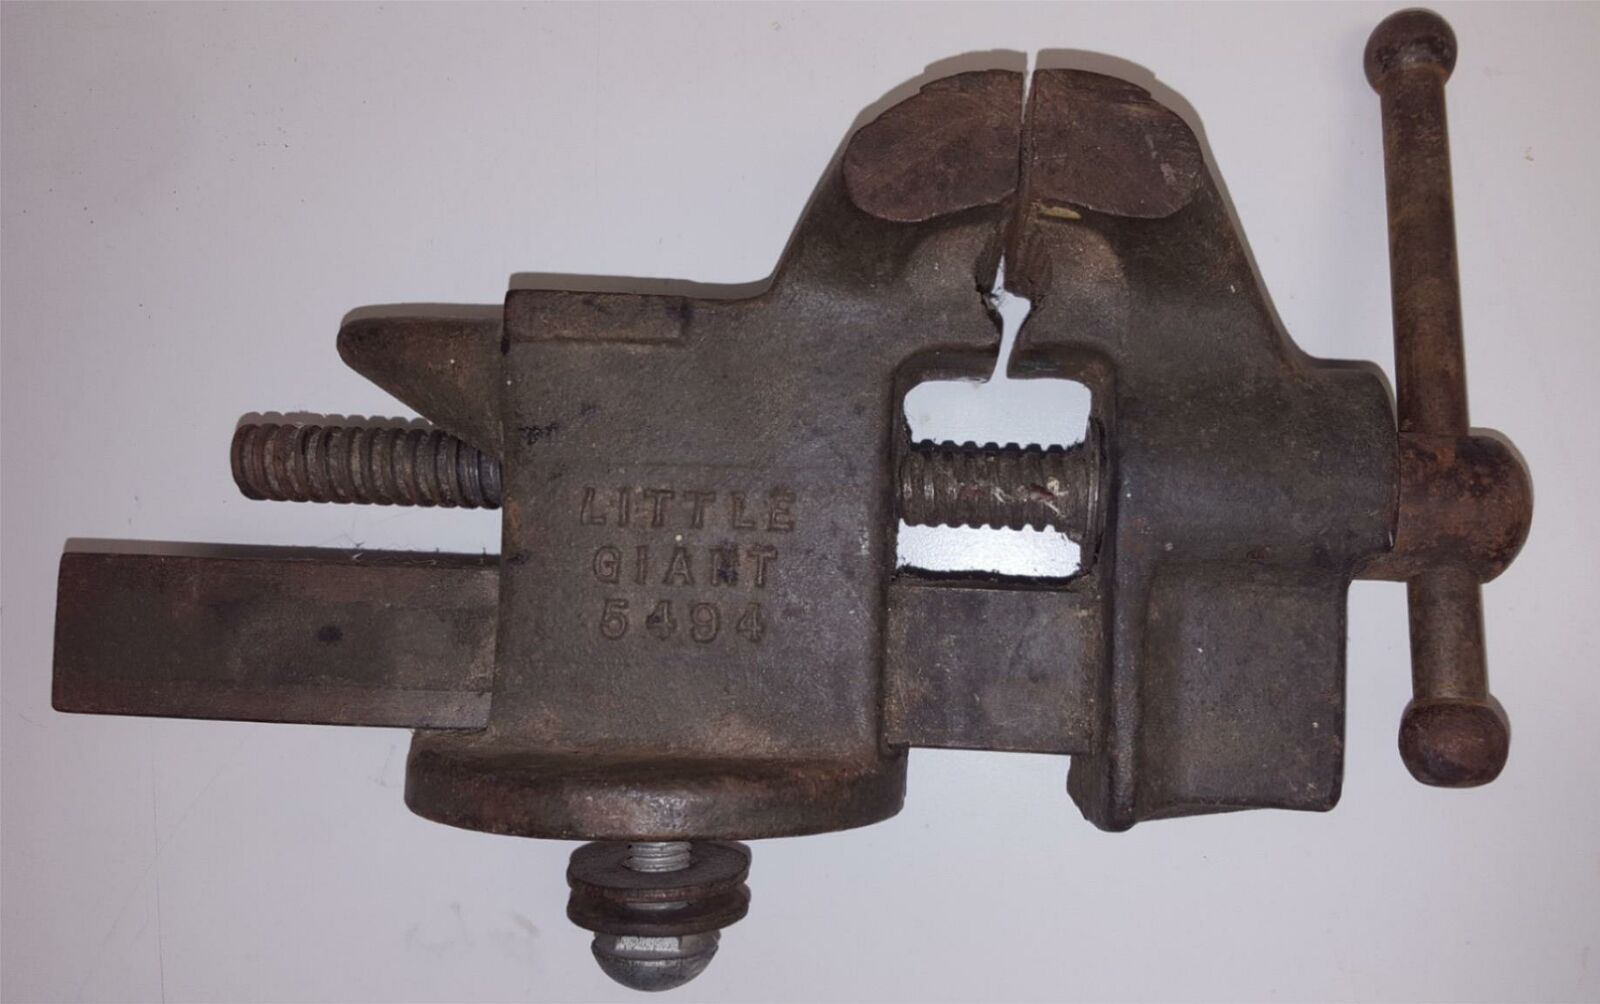 Vintage Little Giant 5494 Bench Vise Made in the USA